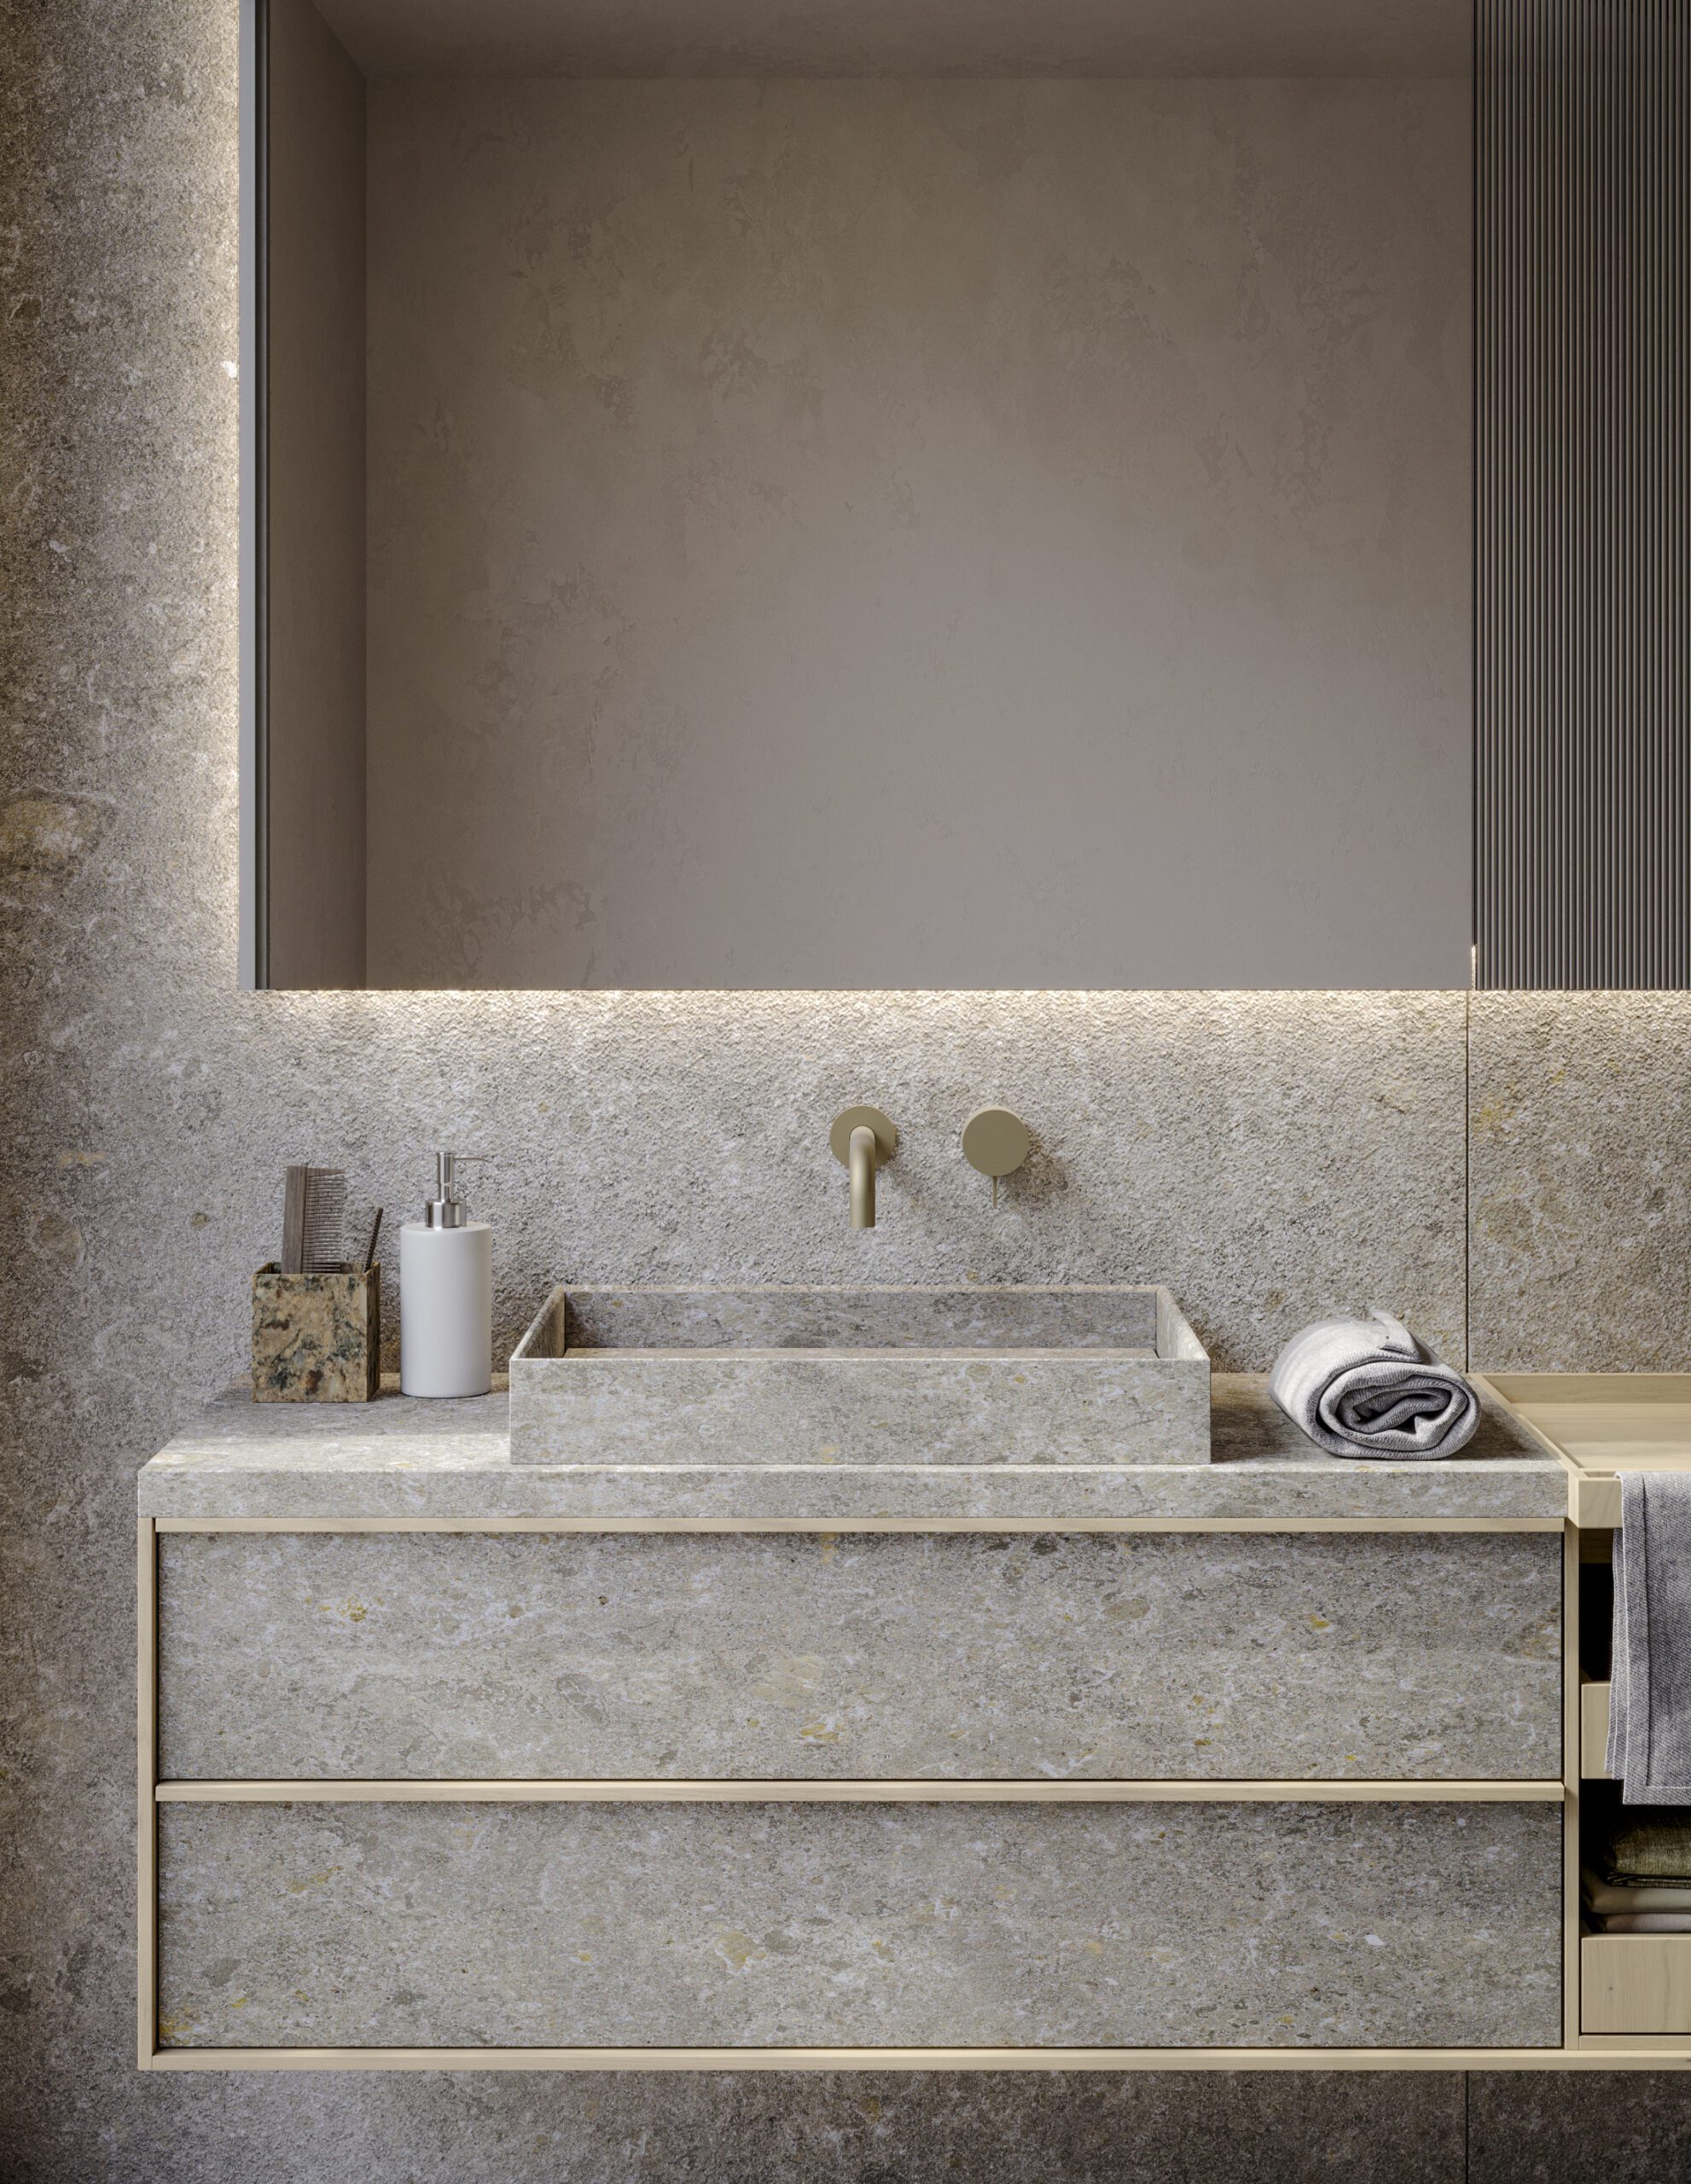 Sartus floating bath cabinet in Grès Meteora Gris bocciardato with matching washbasin and top. The monolithic look is made even more elegant by the delicate accent of the wooden frame in Rovere Avena, which defines the contours of the cabinet while functioning as handle.